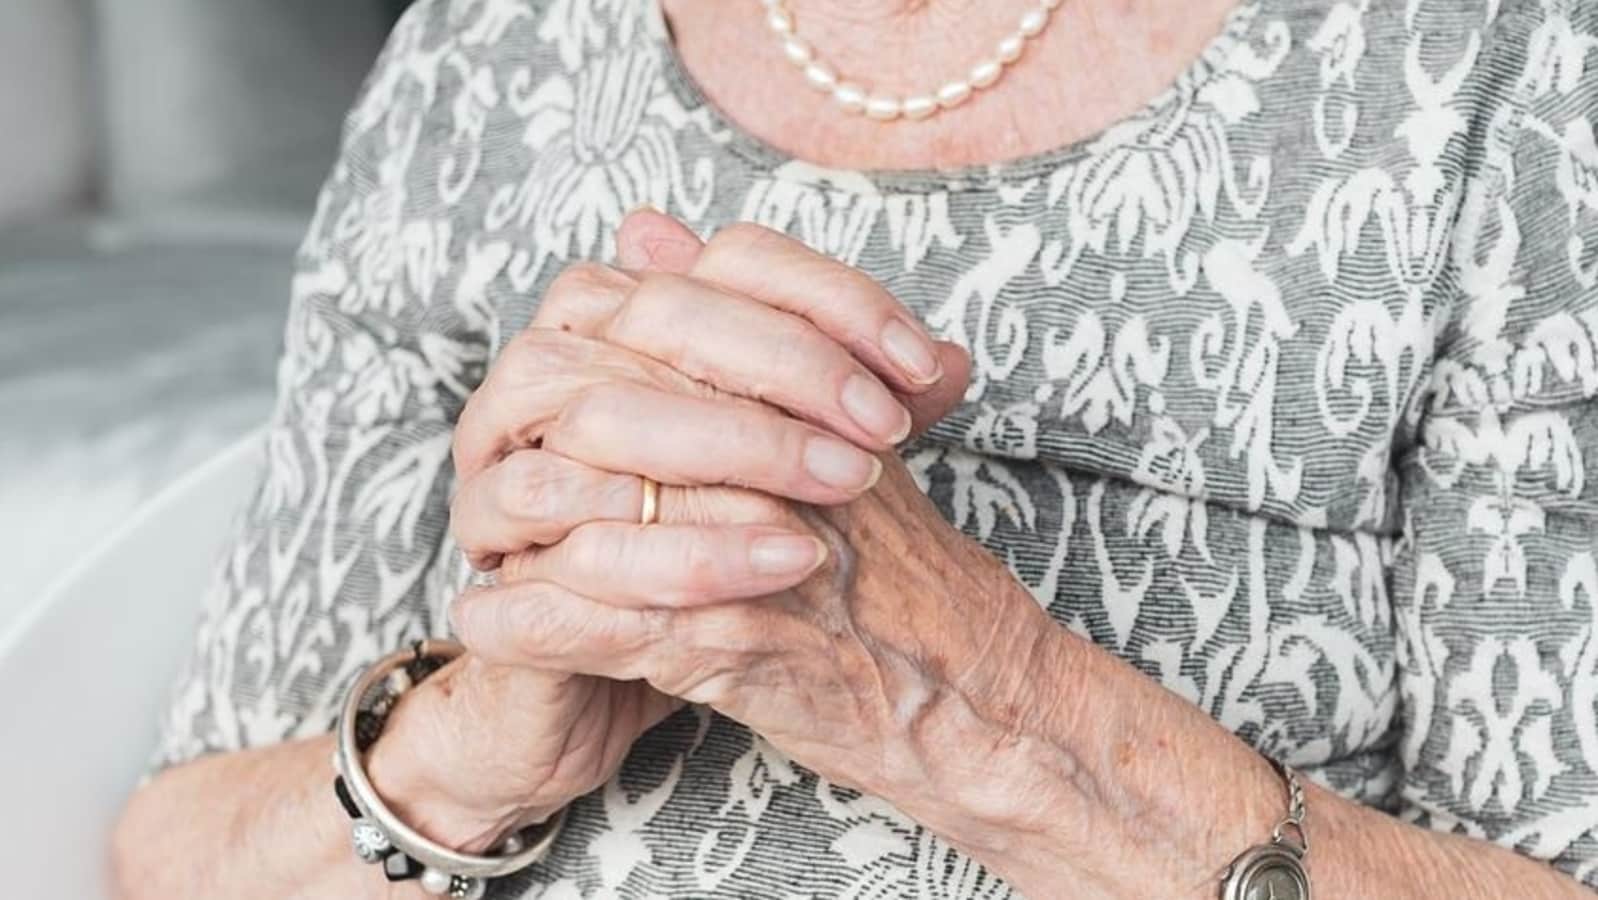 Losing grandmother can lead to repercussions for loved ones, says study